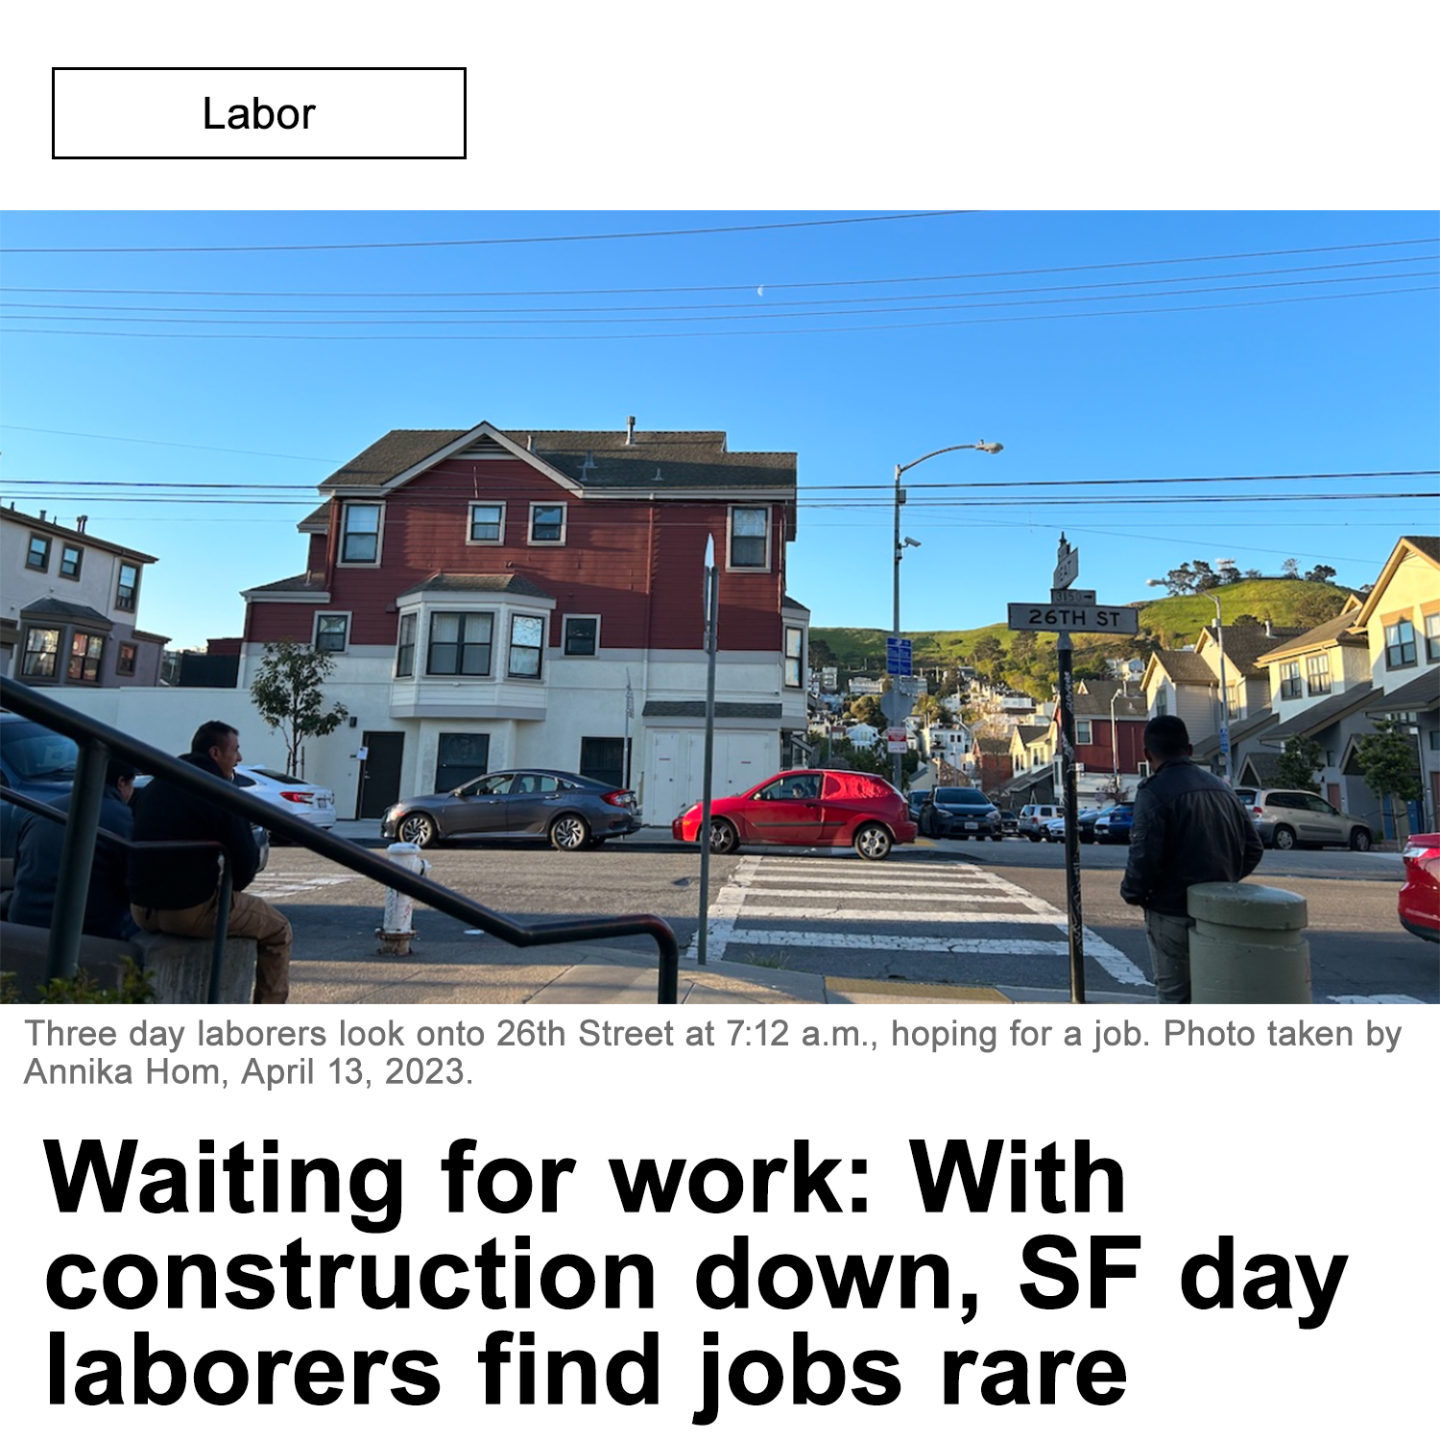 Headline: Waiting for work: With construction down, SF day laborers find jobs rare

Image: Three day laborers look onto 26th Street at 7:12 a.m., hoping for a job. 